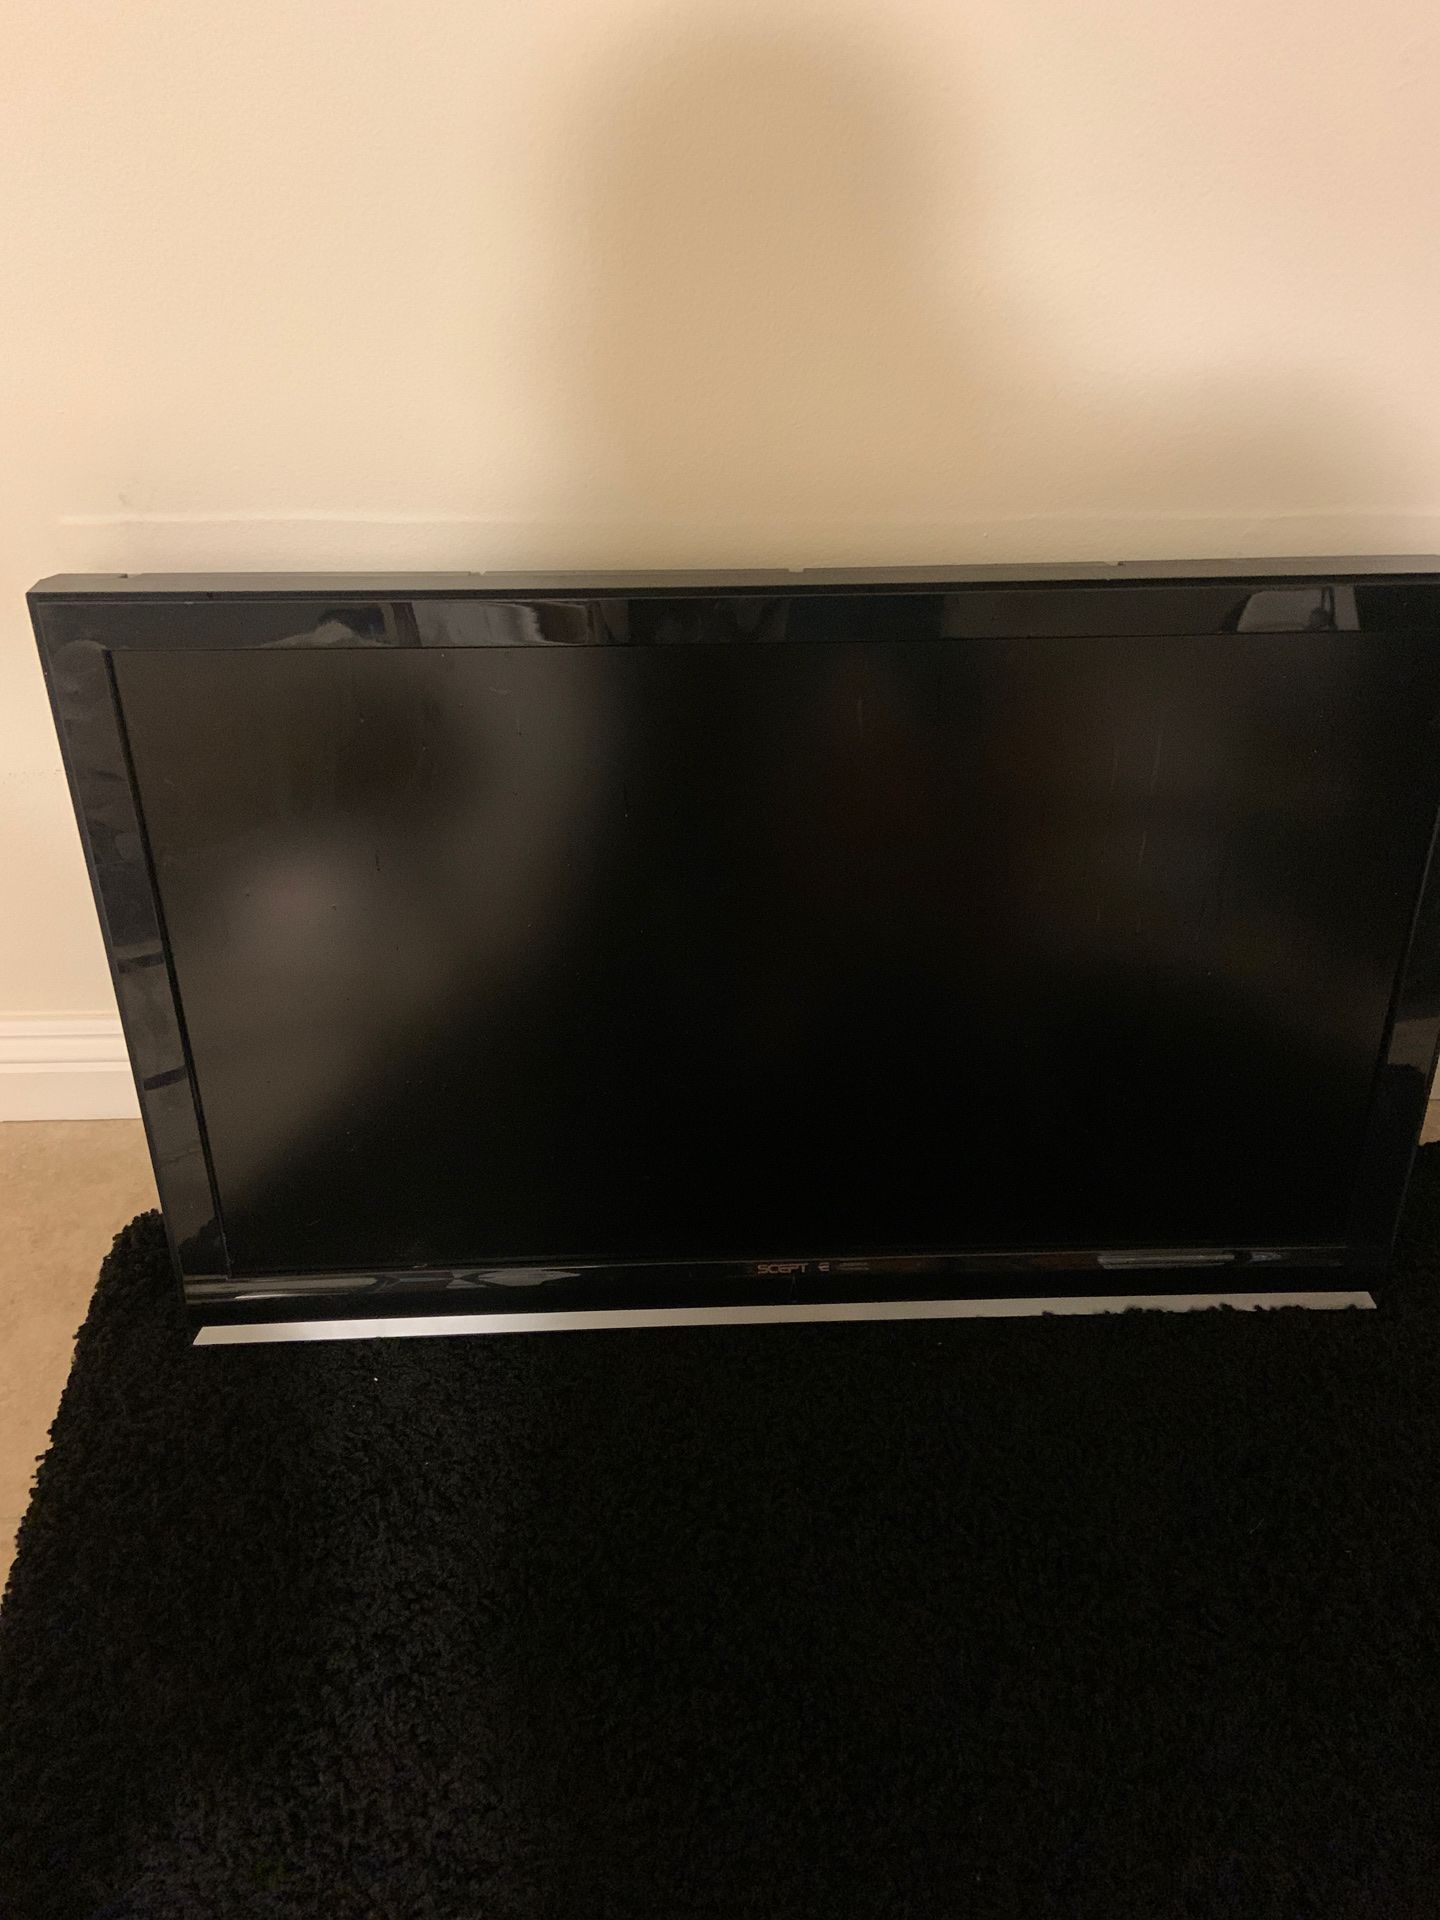 50” Spectre HDTV “Great Condition”